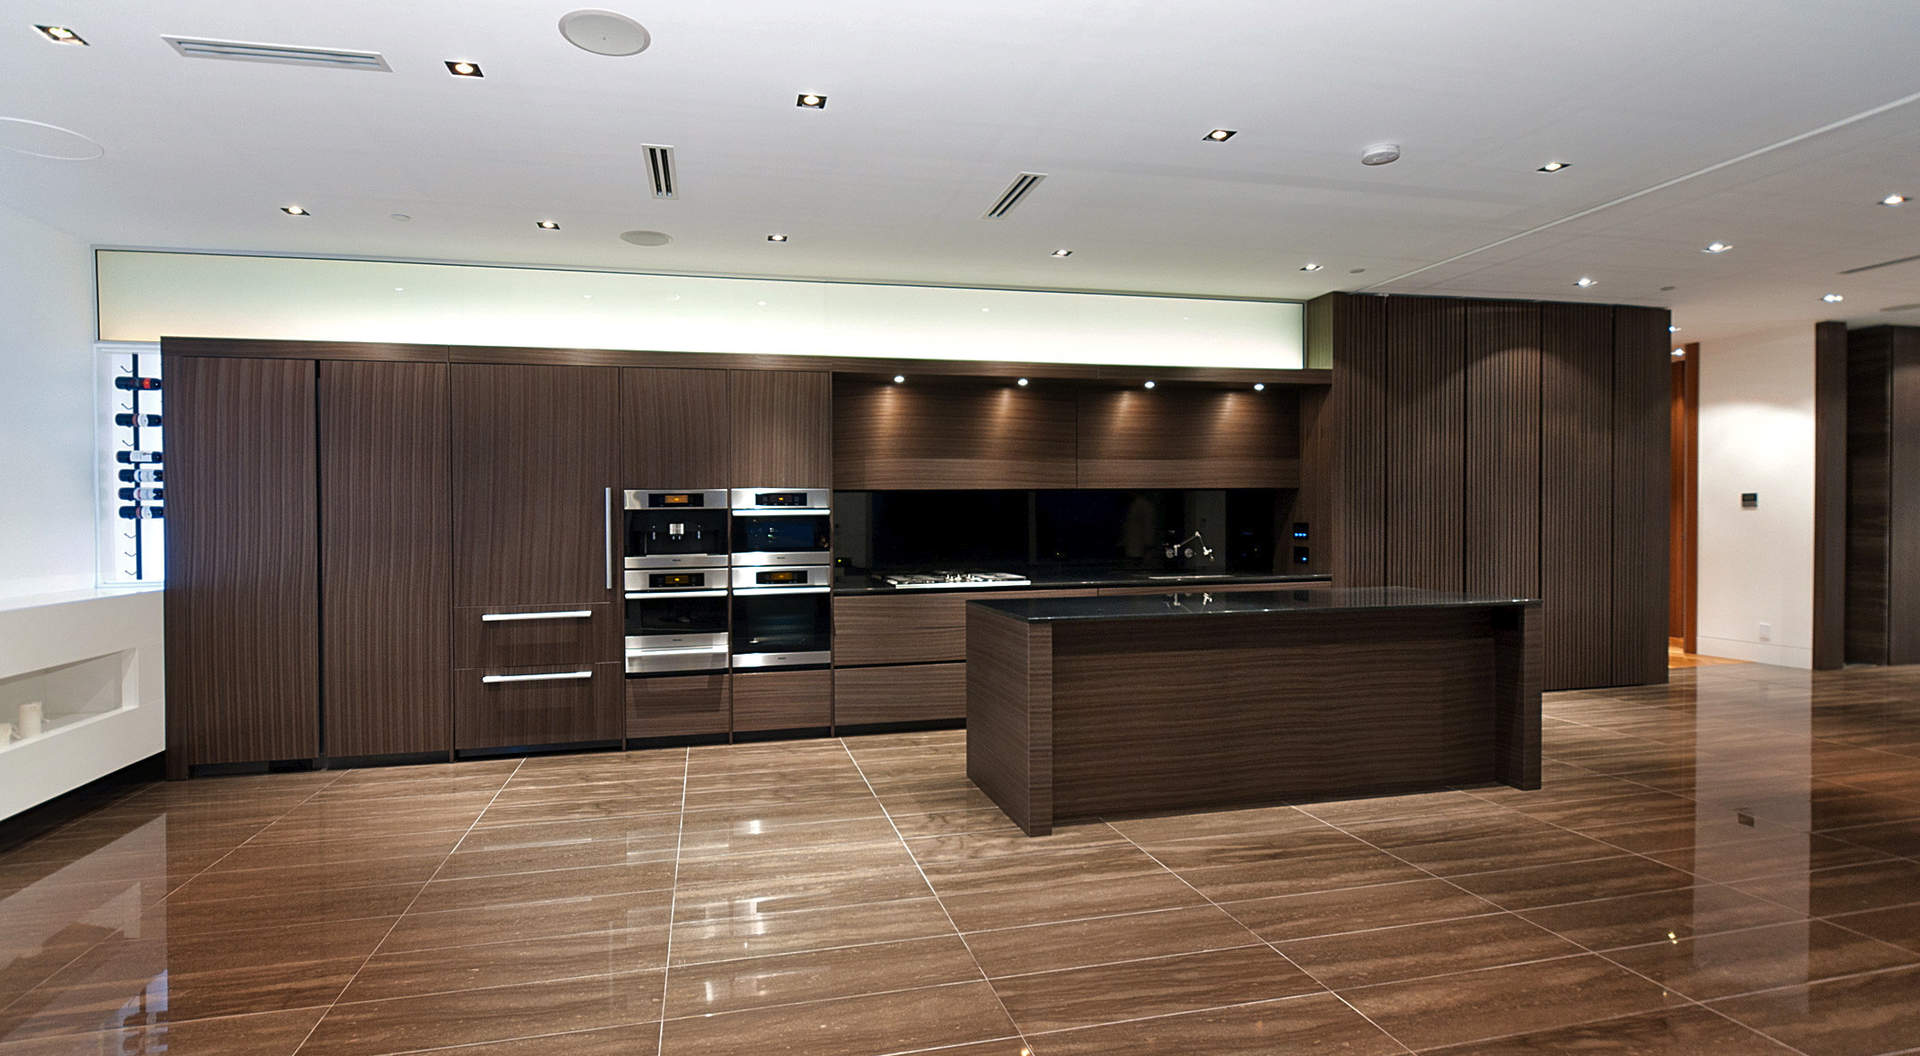 State-of-the-Art Kitchen with Ample Storage